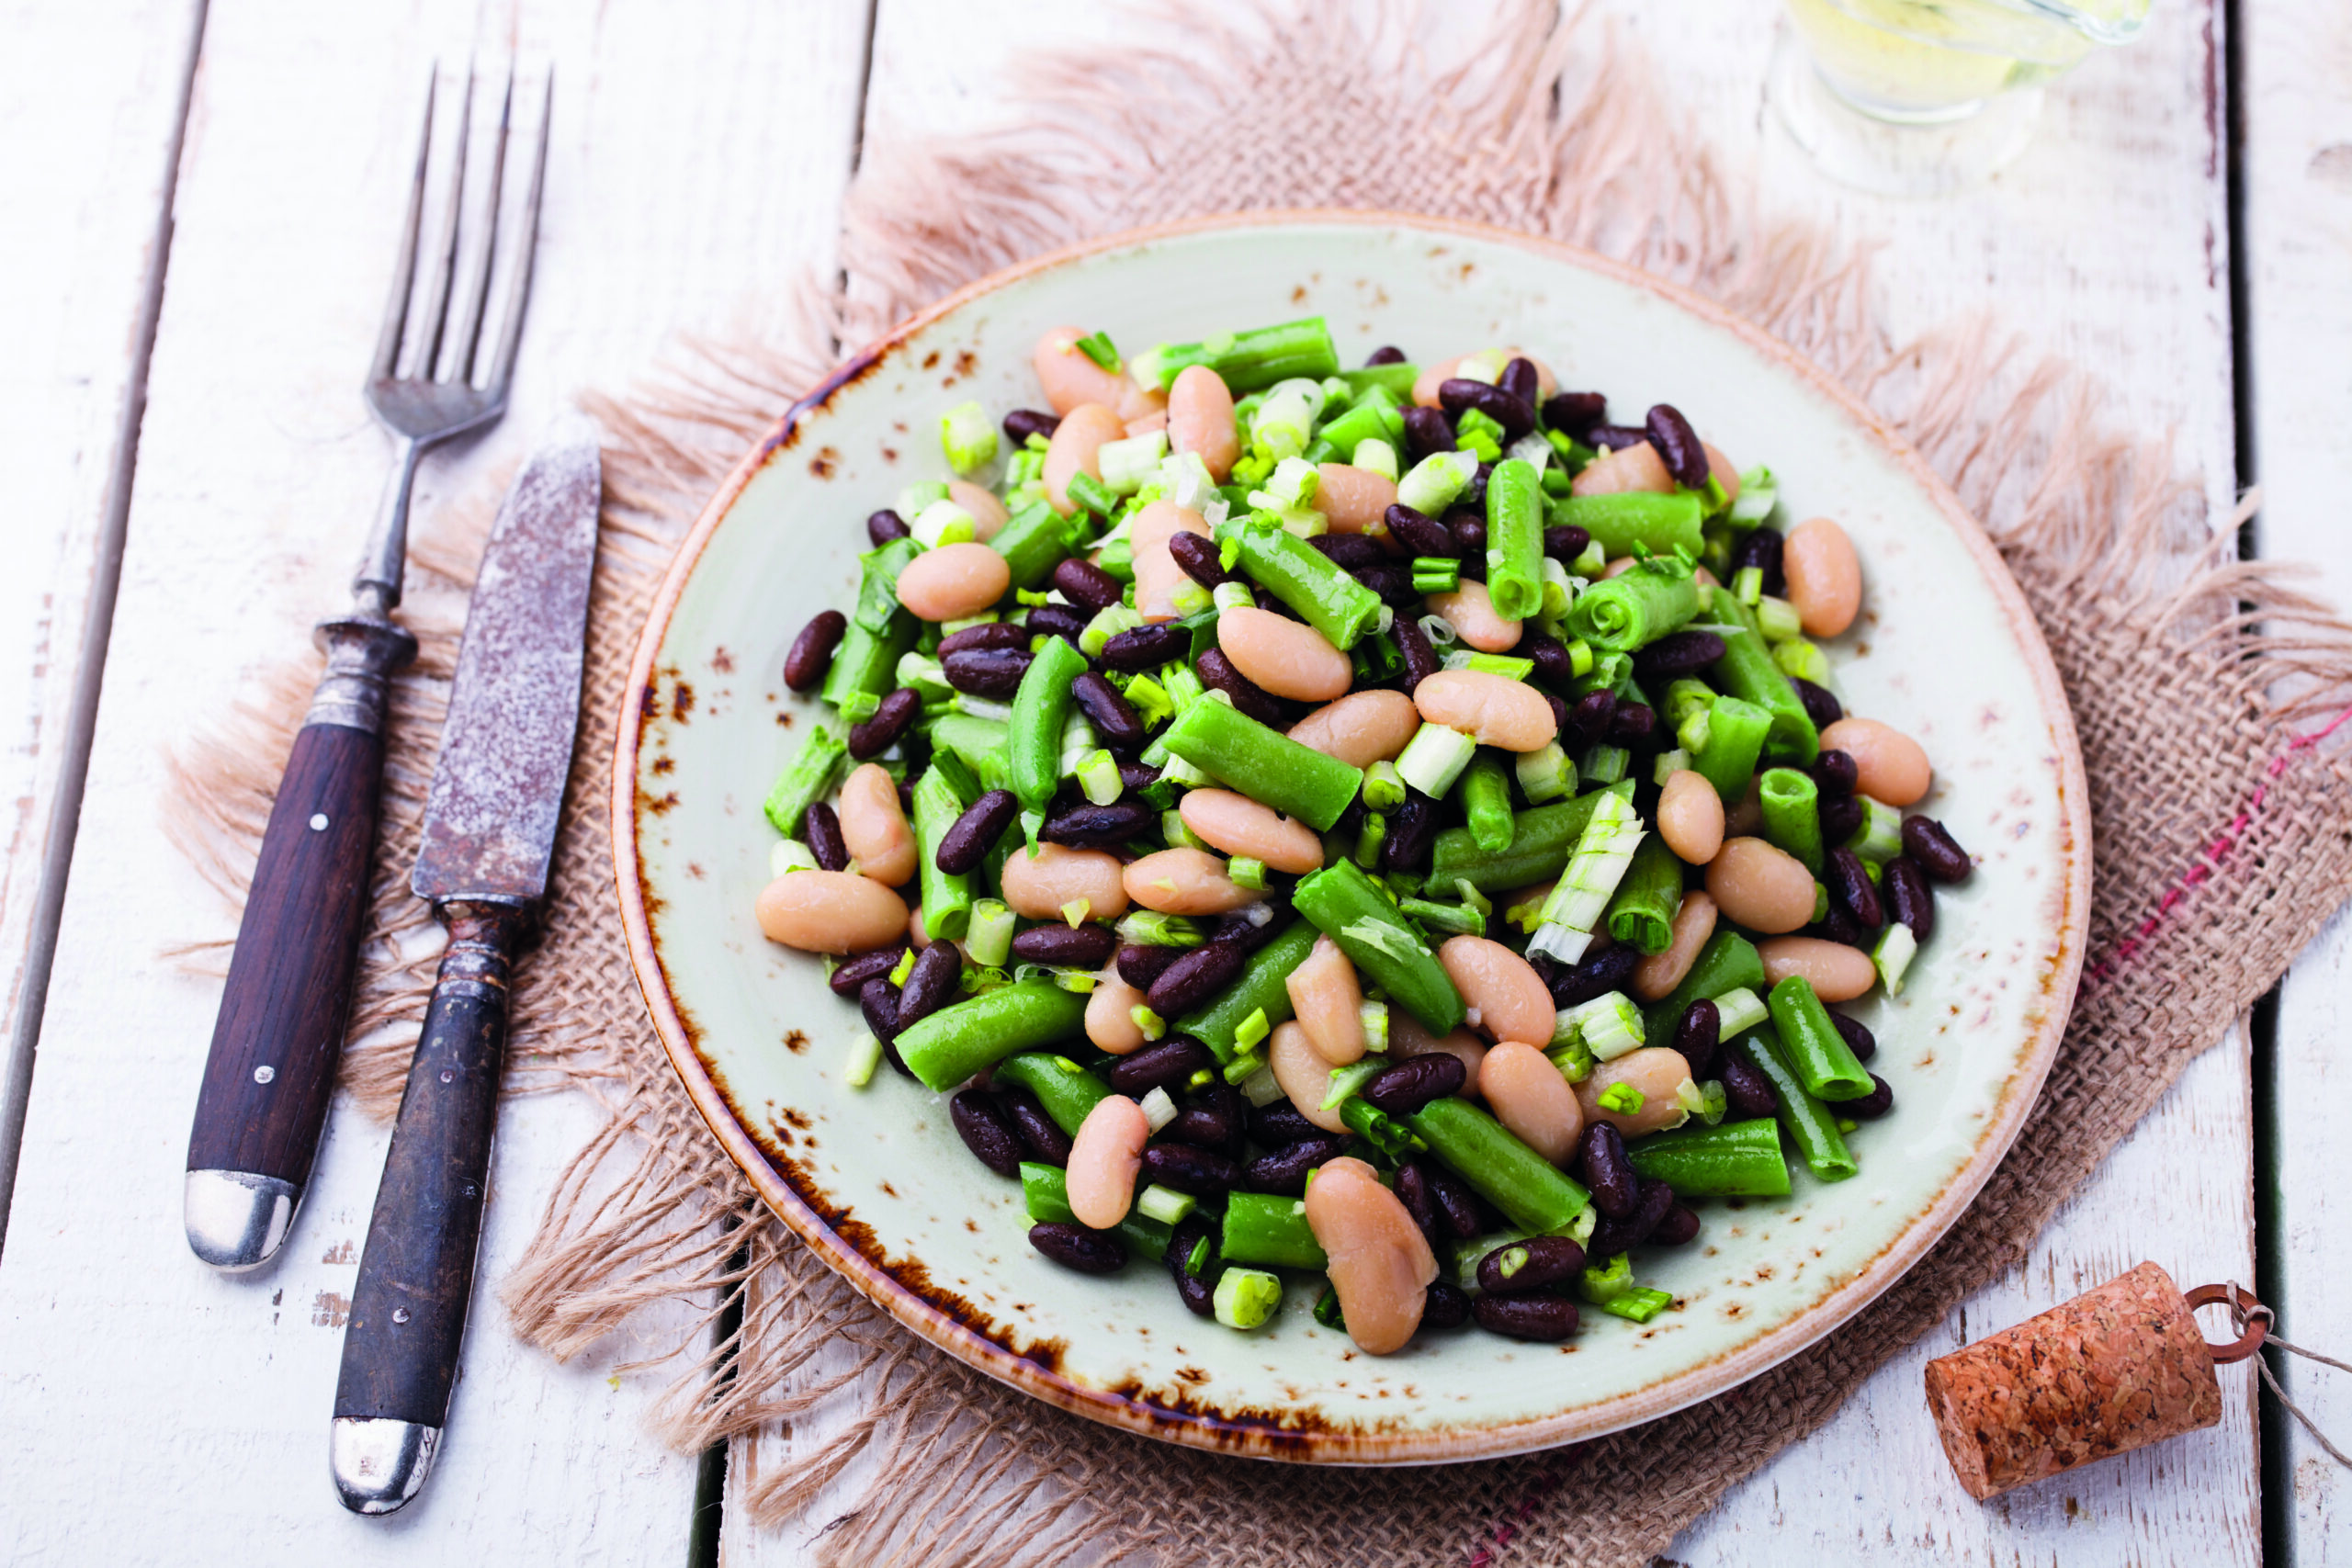 Three beans salad with herbs and olive oil. A perfect source for magnesium.